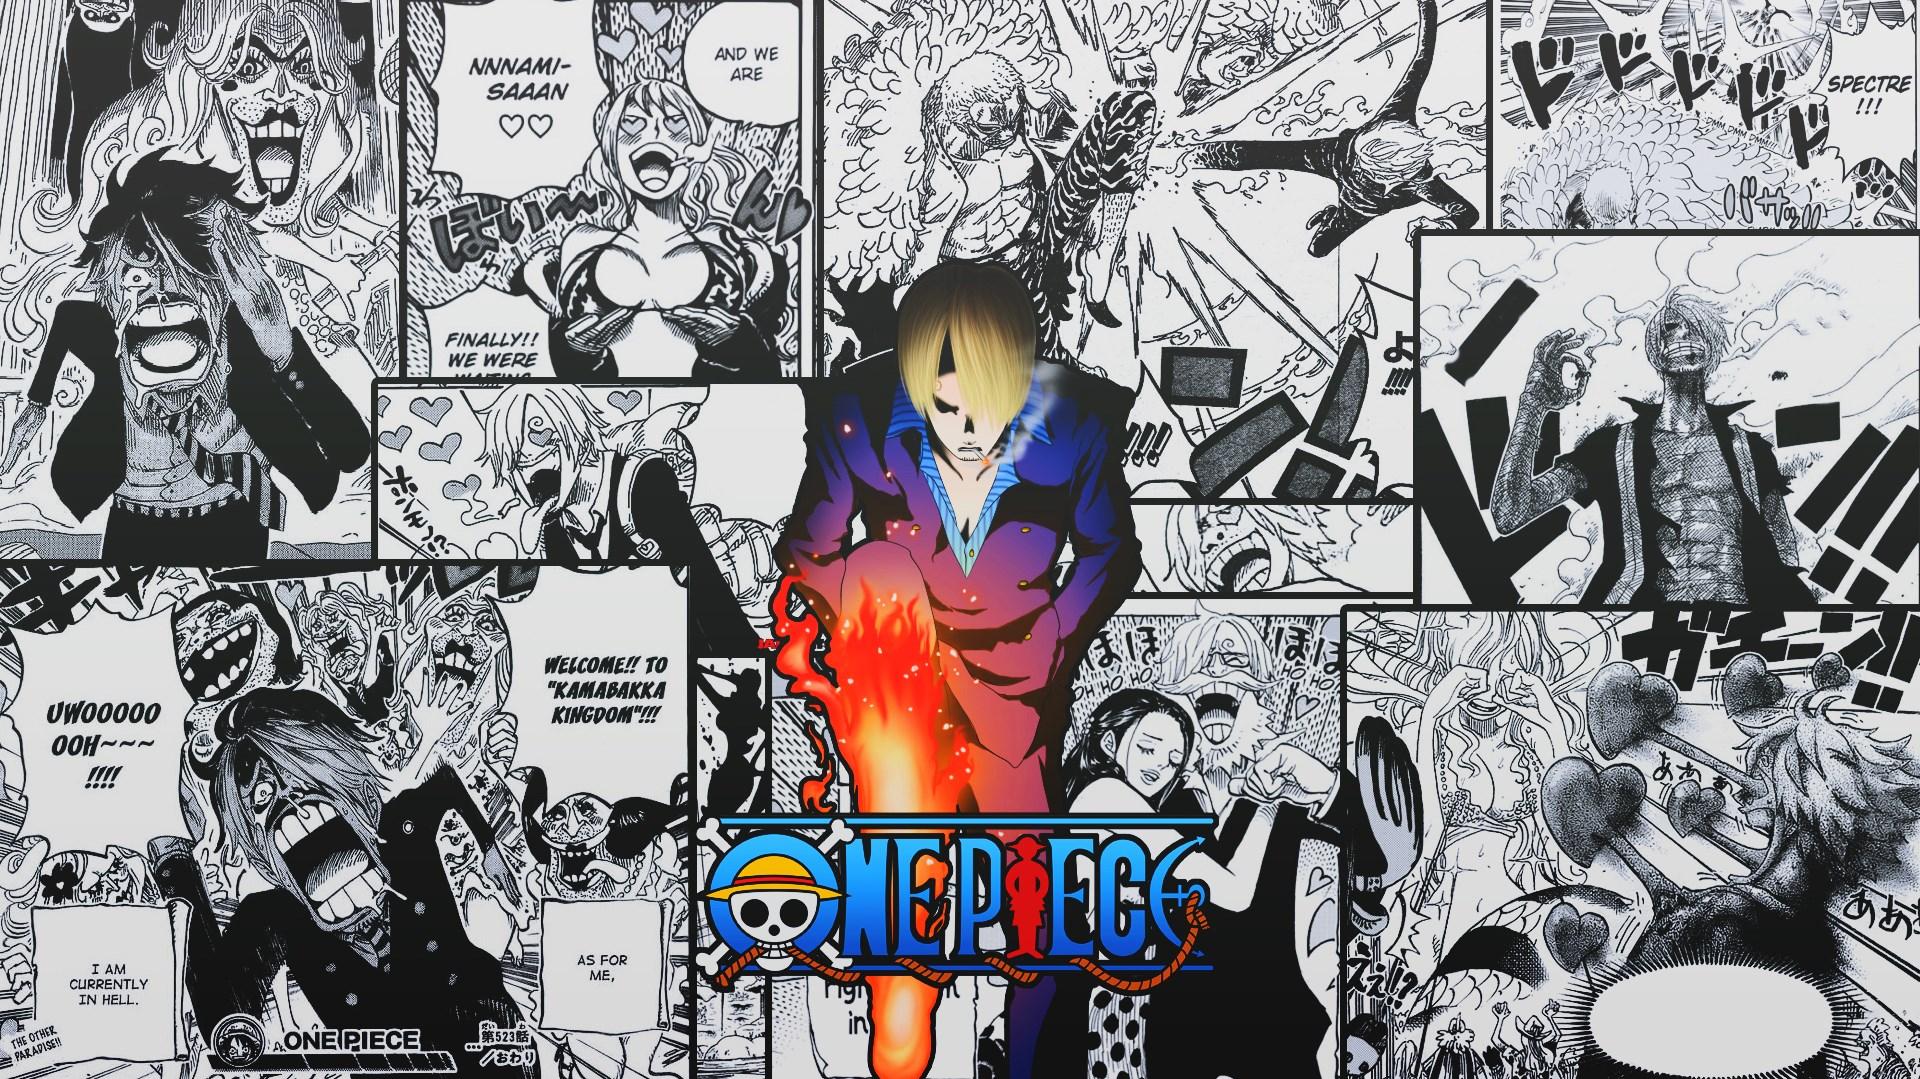 Anime One Piece For Mac Playmat Gaming Mat